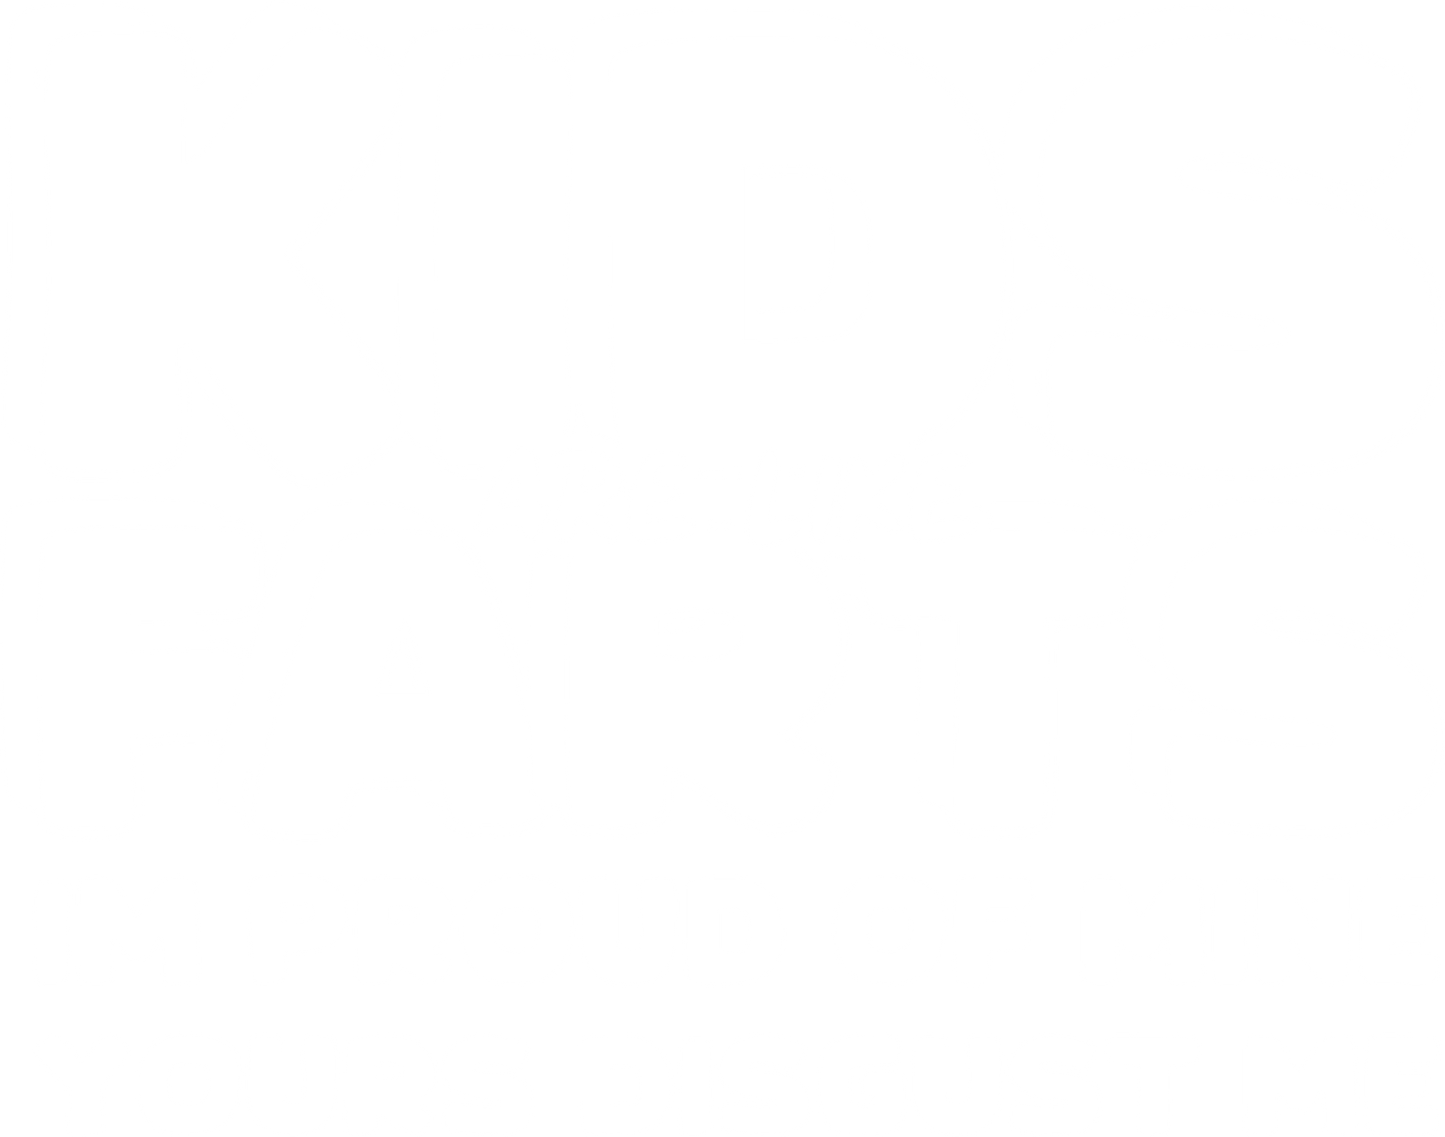 Kids are like Farts, I am Proud of Mine, Yours Disgust Me